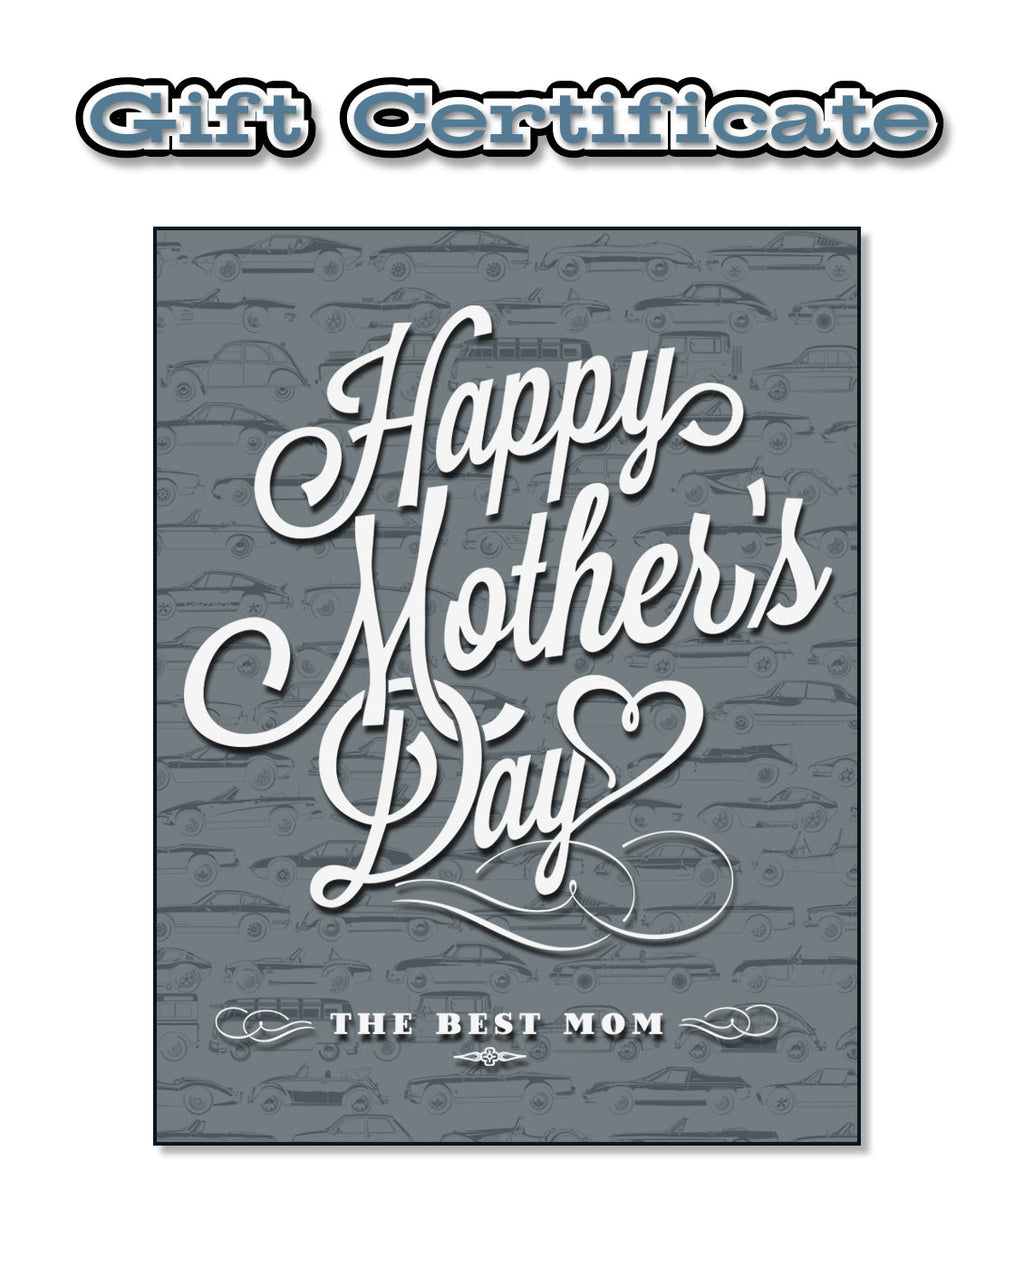 Gift Certificate - Mother's Day!